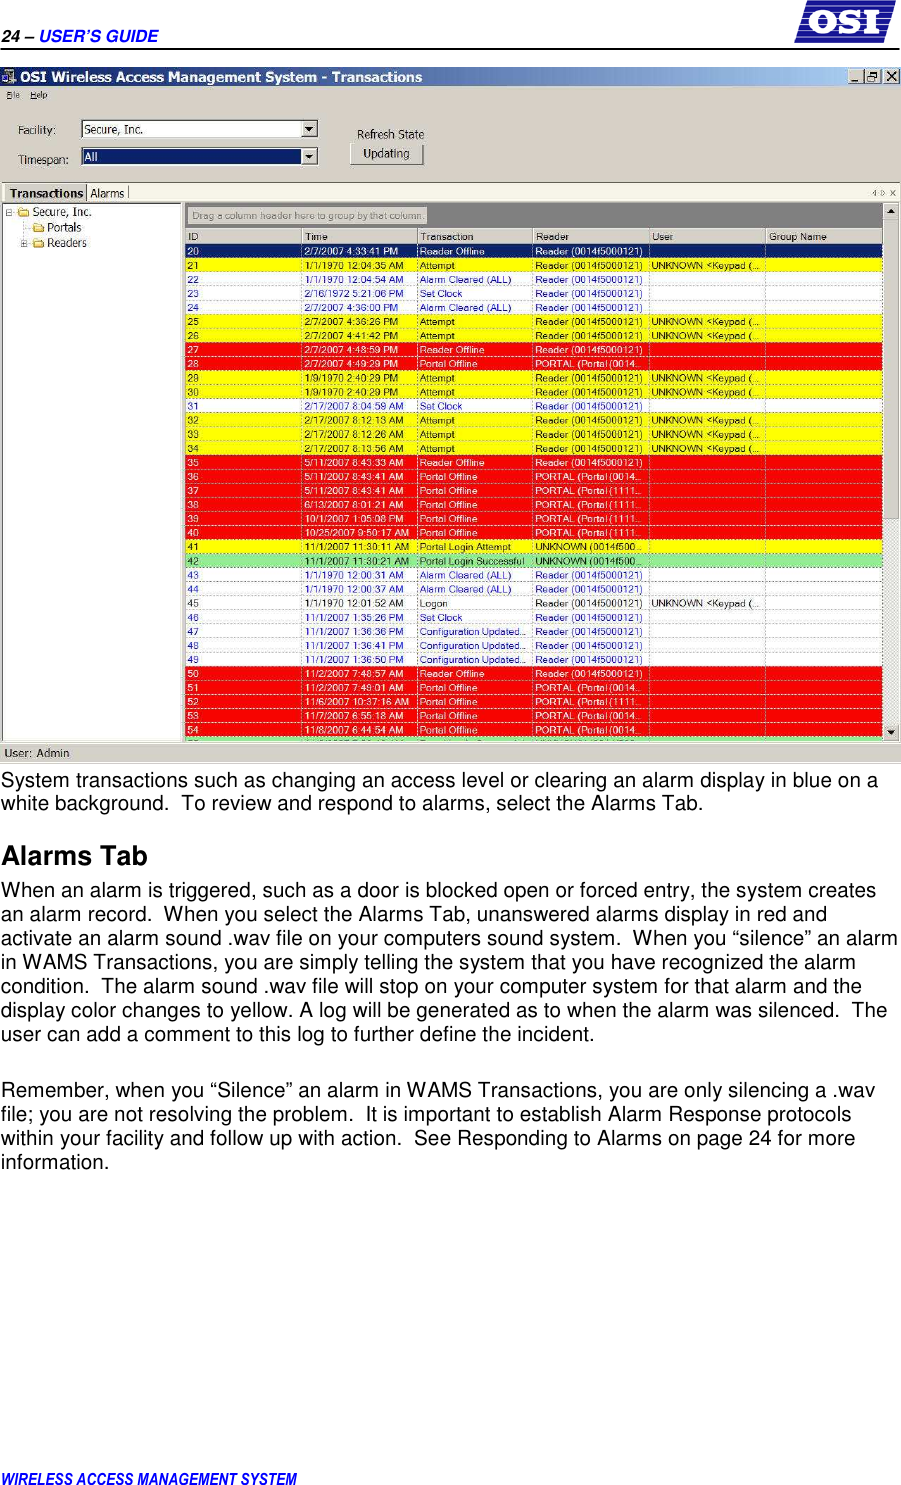 24 – USER’S GUIDE      WIRELESS ACCESS MANAGEMENT SYSTEM  System transactions such as changing an access level or clearing an alarm display in blue on a white background.  To review and respond to alarms, select the Alarms Tab. Alarms Tab When an alarm is triggered, such as a door is blocked open or forced entry, the system creates an alarm record.  When you select the Alarms Tab, unanswered alarms display in red and activate an alarm sound .wav file on your computers sound system.  When you “silence” an alarm in WAMS Transactions, you are simply telling the system that you have recognized the alarm condition.  The alarm sound .wav file will stop on your computer system for that alarm and the display color changes to yellow. A log will be generated as to when the alarm was silenced.  The user can add a comment to this log to further define the incident.  Remember, when you “Silence” an alarm in WAMS Transactions, you are only silencing a .wav file; you are not resolving the problem.  It is important to establish Alarm Response protocols within your facility and follow up with action.  See Responding to Alarms on page 24 for more information.  